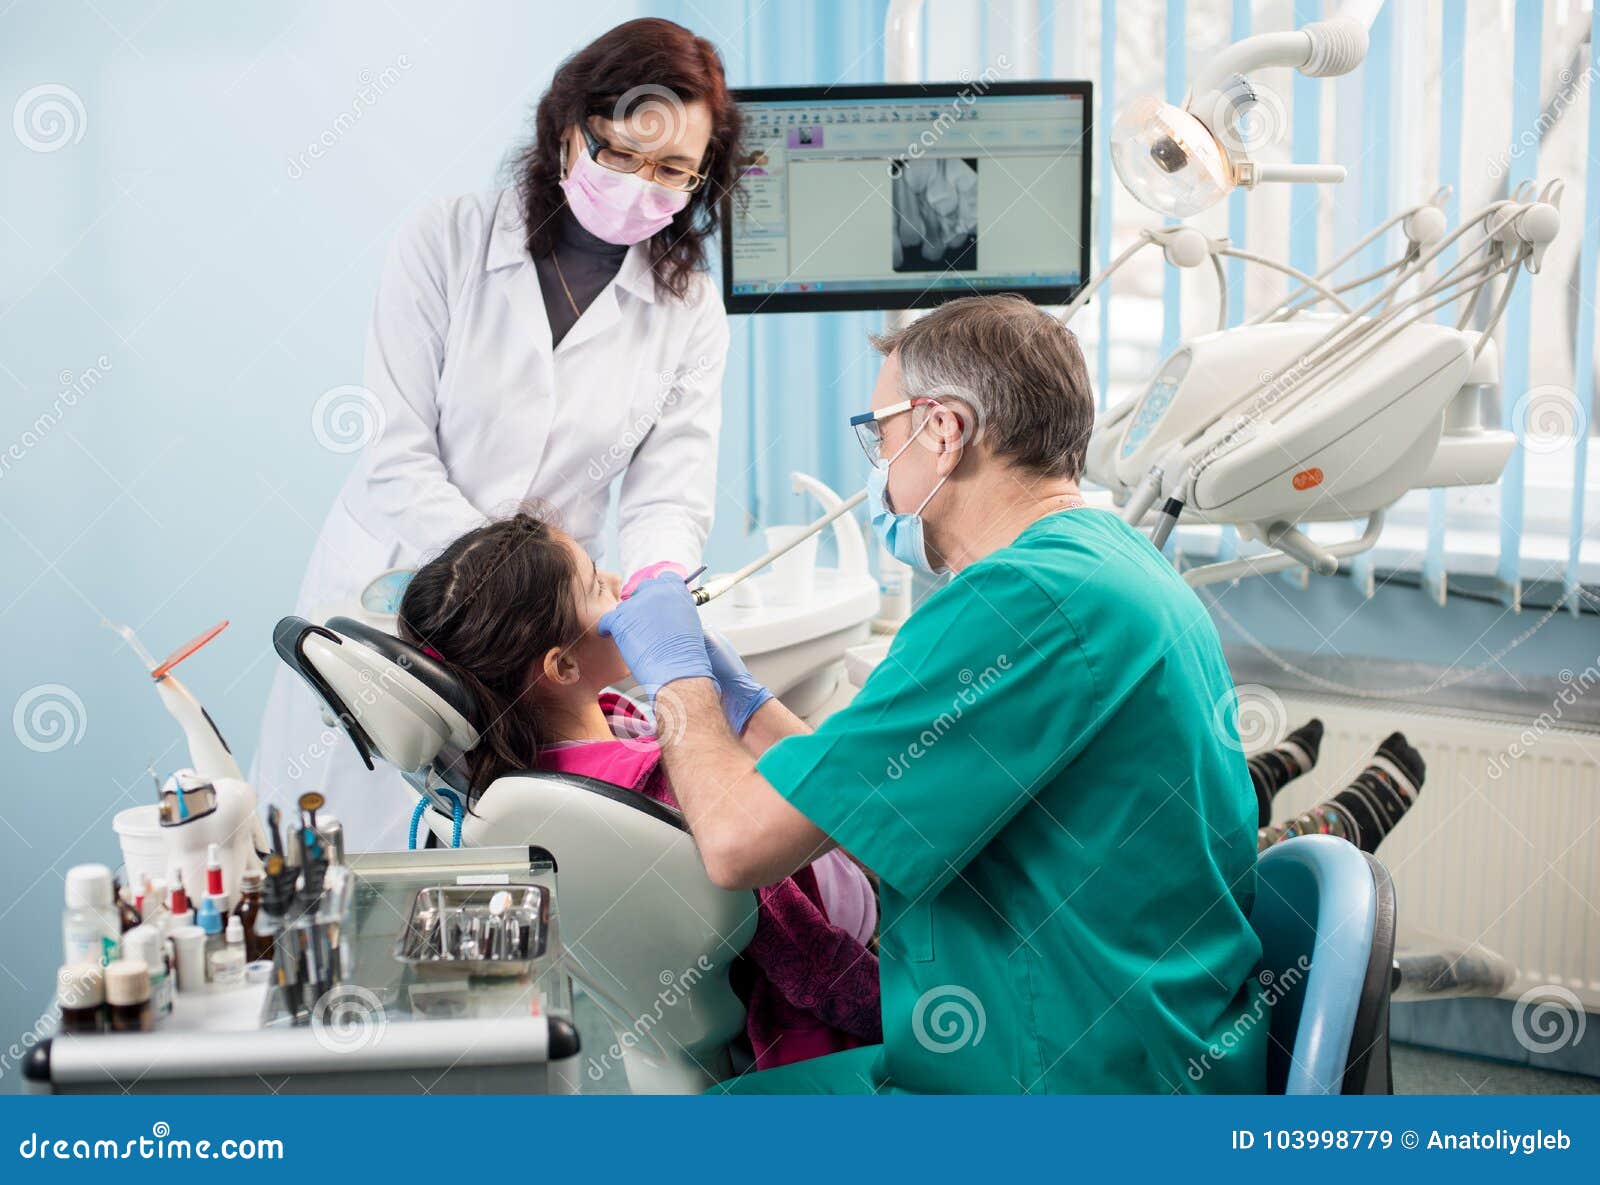 girl with on the first dental visit. senior pediatric dentist with nurse treating patient teeth at the dental office